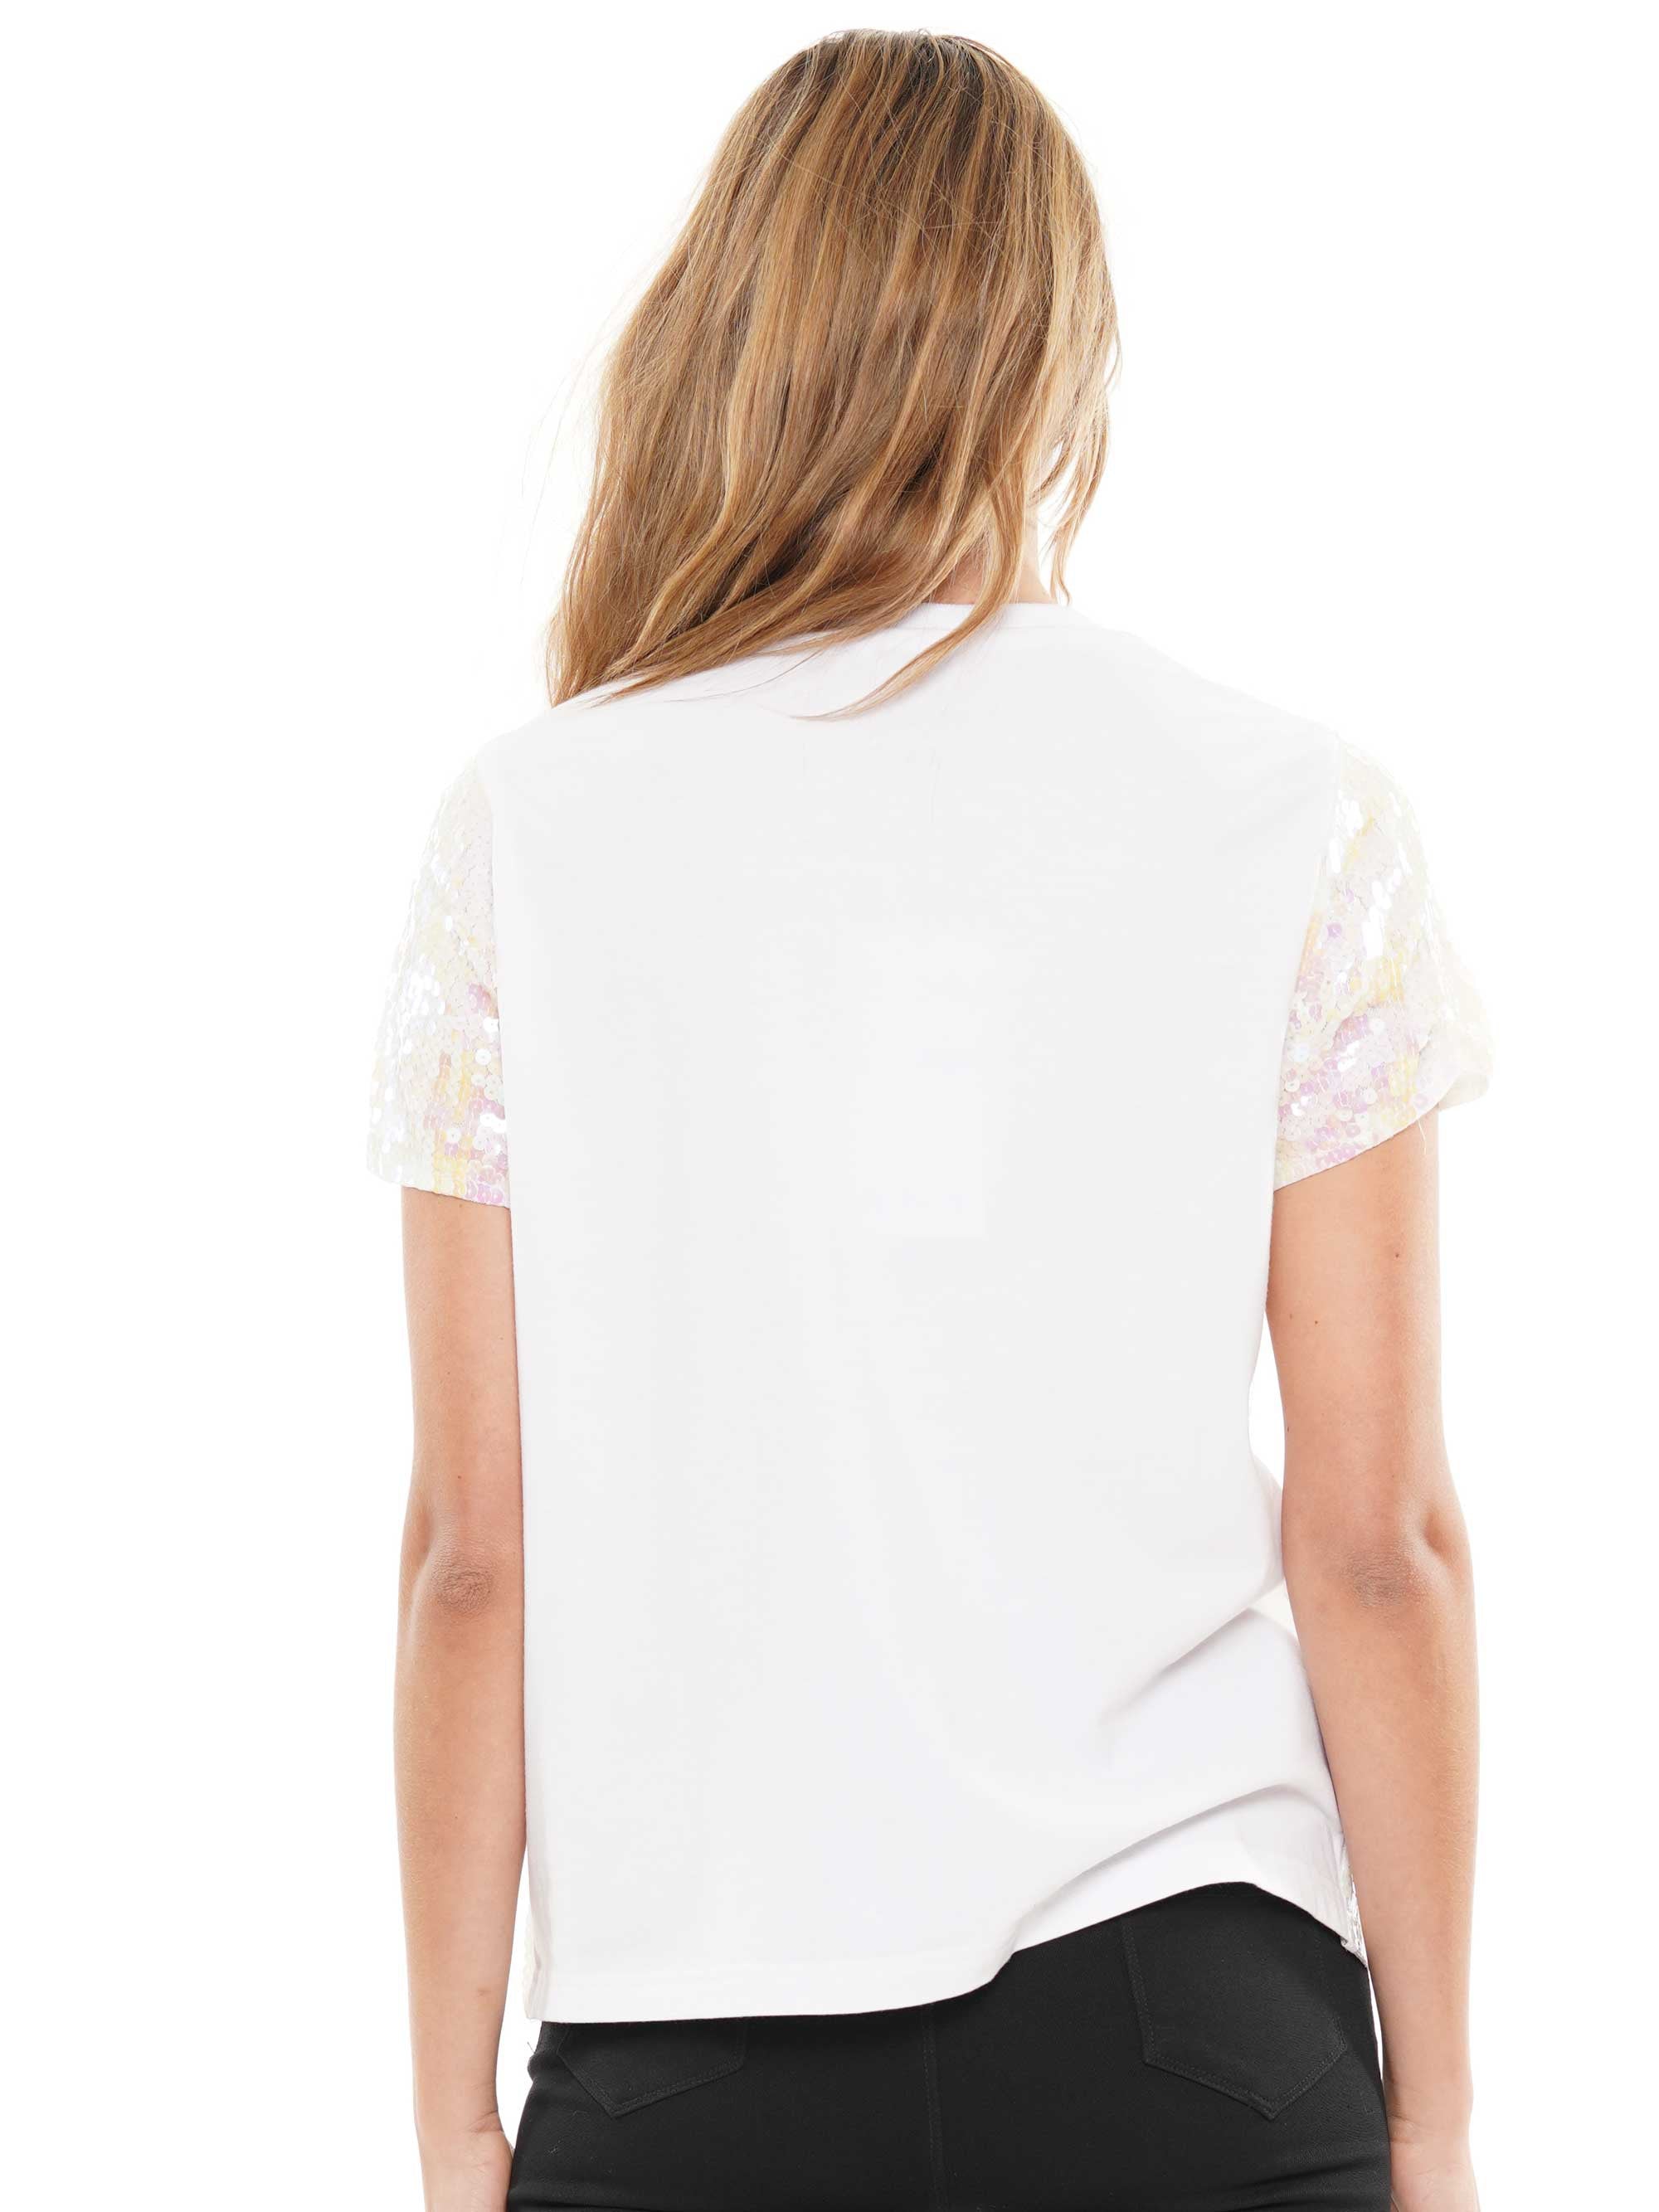 BRIDE TO BE White Sequin T-Shirt